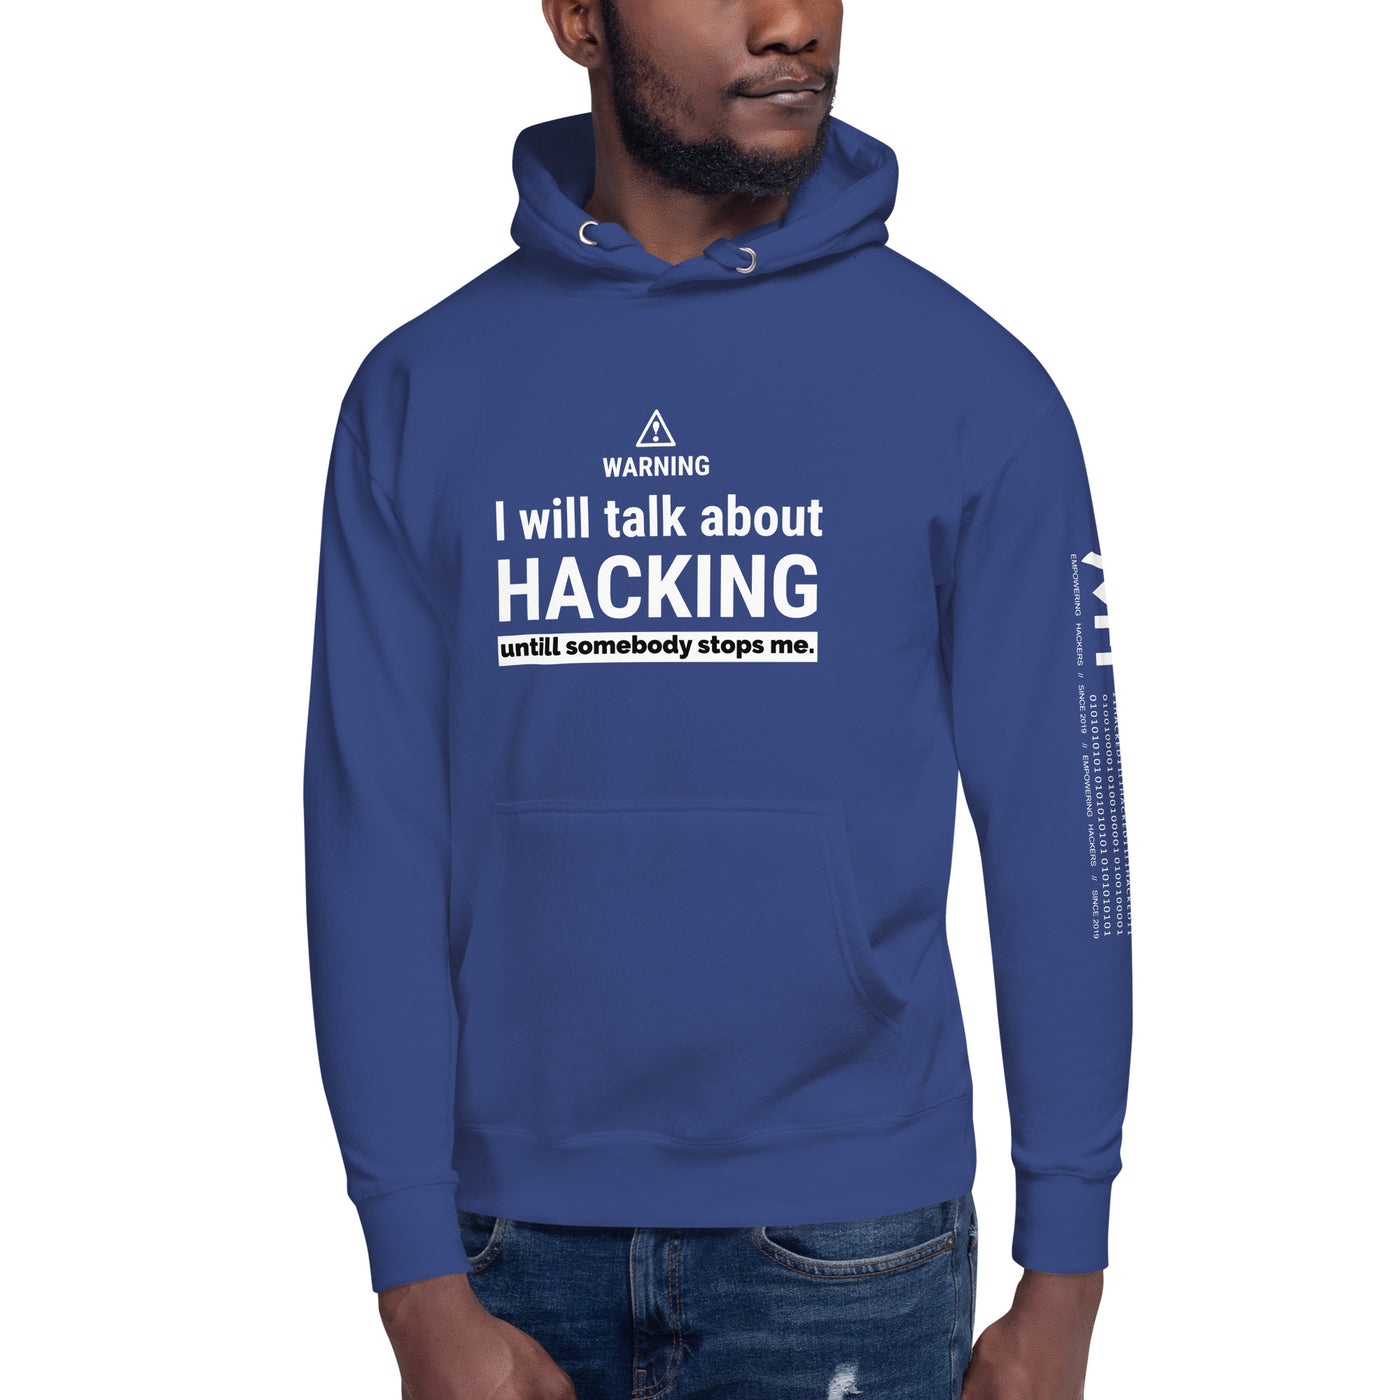 I will talk about HACKING - Unisex Hoodie